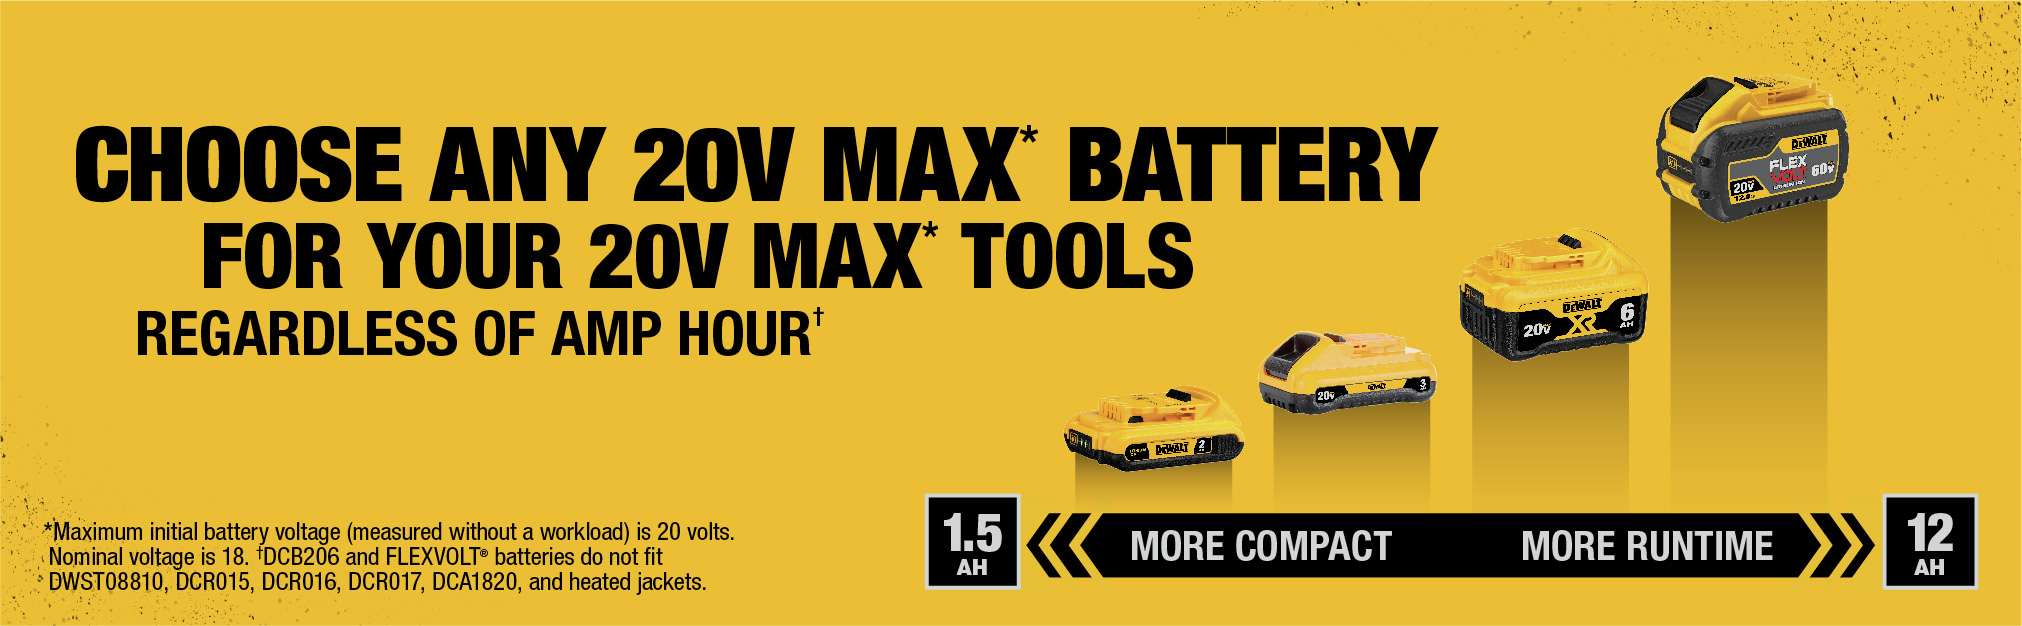 200 plus products and growing in the 20V MAX family of tools